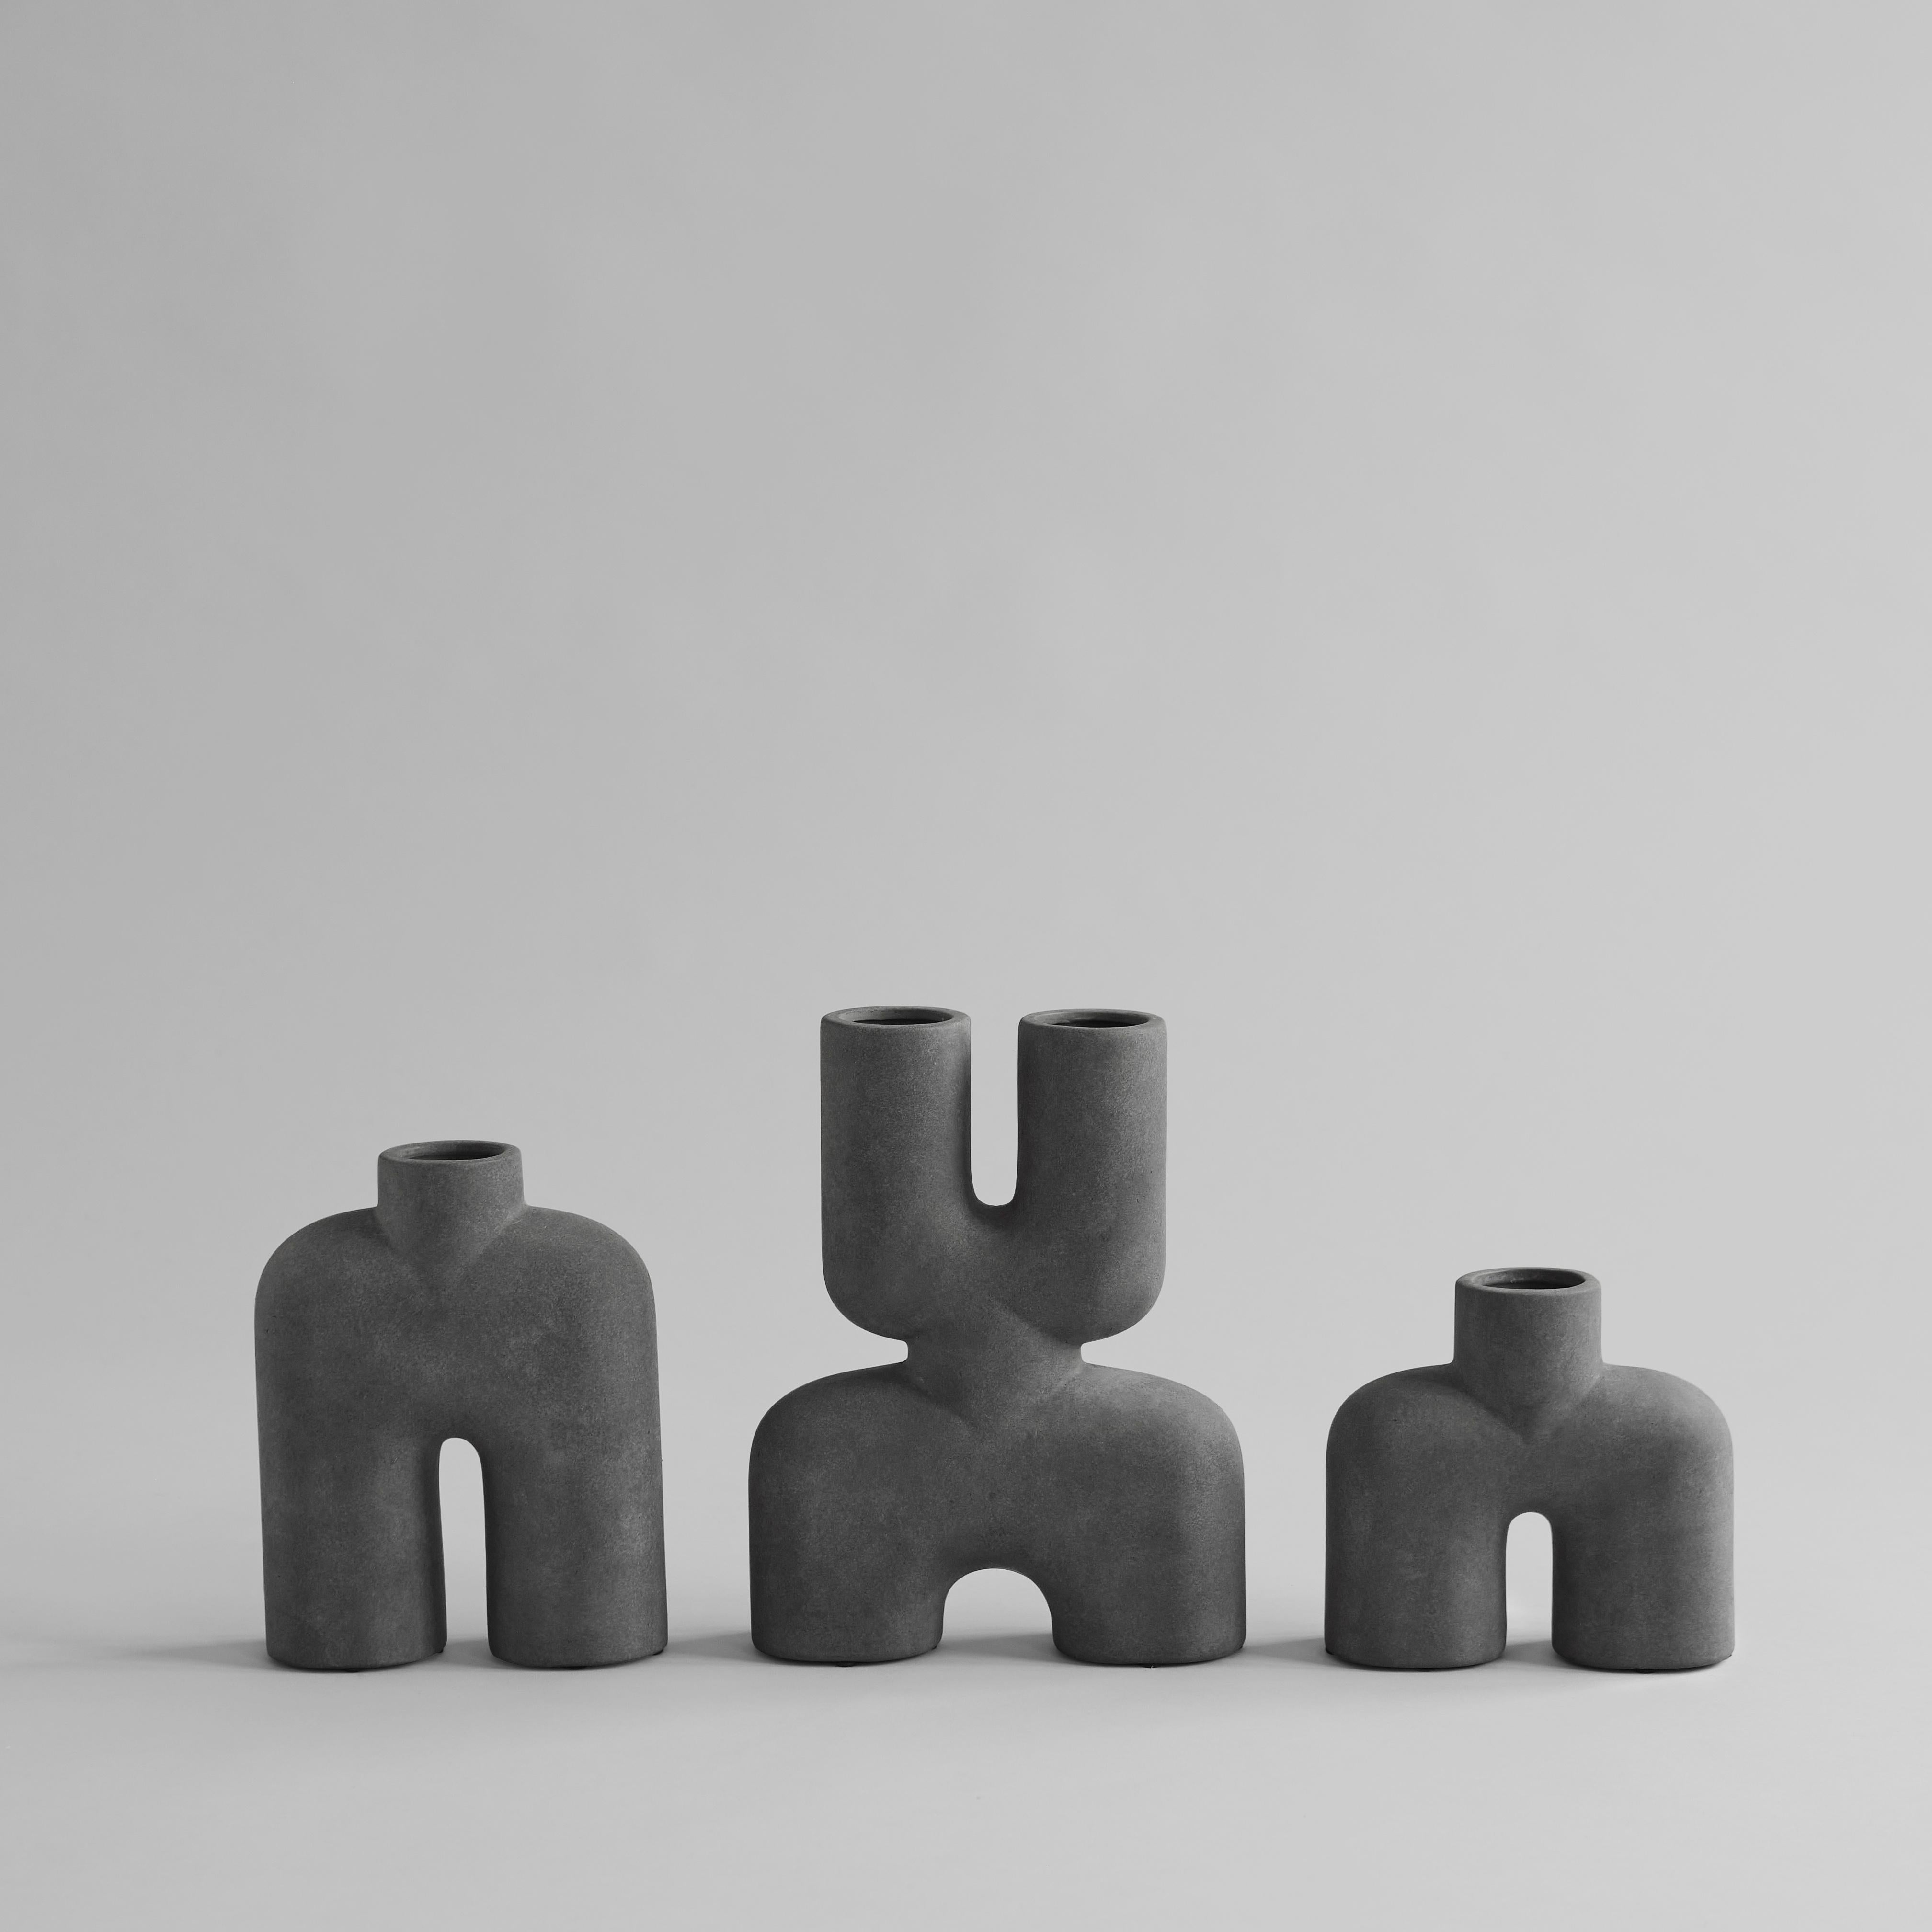 Black Cobra tall mini by 101 Copenhagen
Designed by Kristian Sofus Hansen & Tommy Hyldahl
Dimensions: L18 / W6,5 / H23 CM
Materials: Ceramic

A tribute to the Cobra Arts Movement of the 1960s, the collection is the epitome of quirky vases that